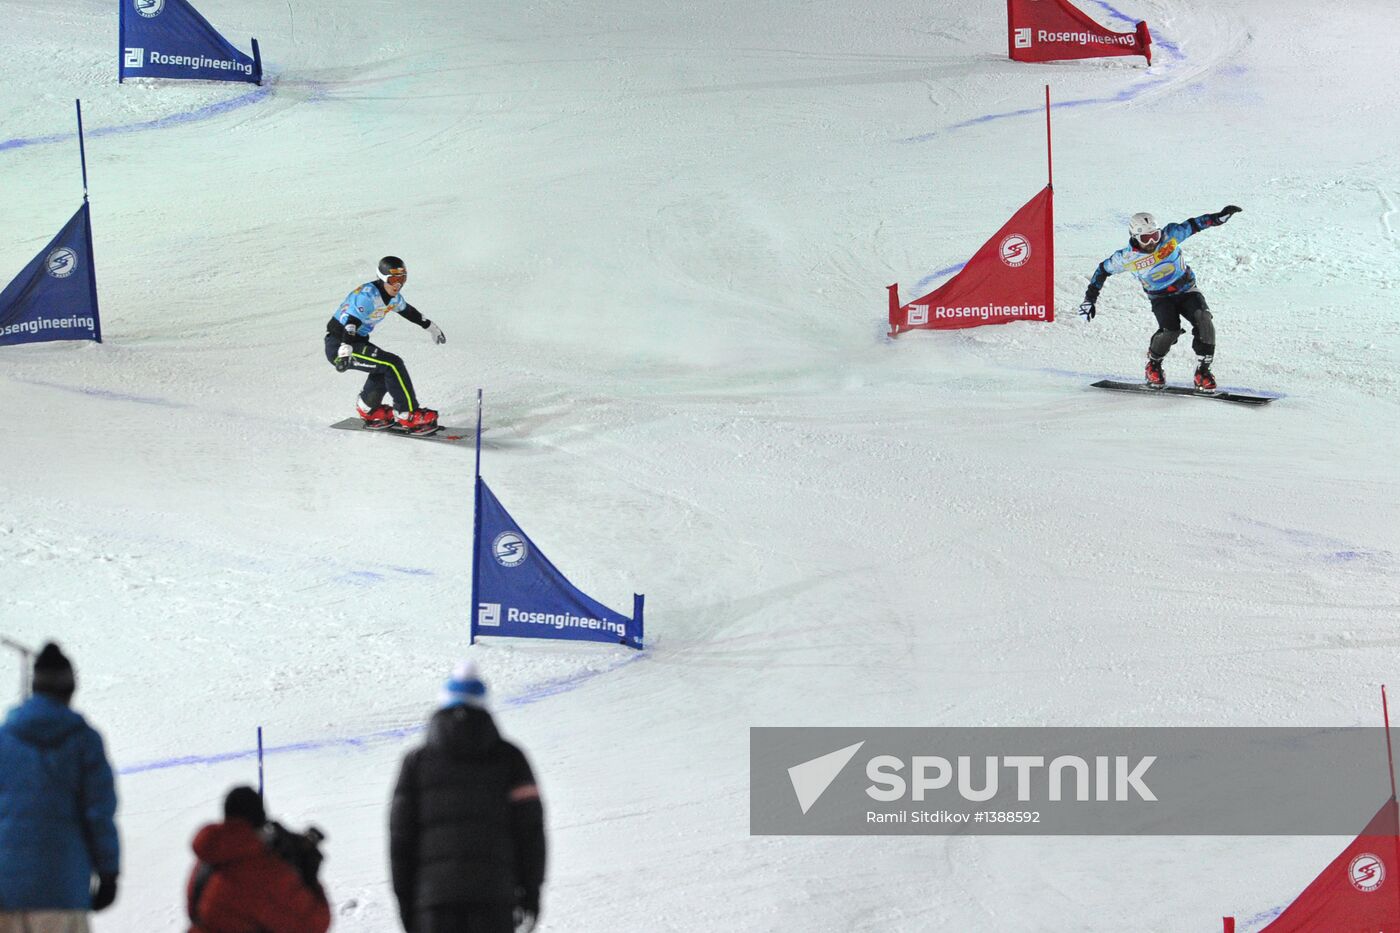 Snowboard World Cup Stage. Parallel Slalom